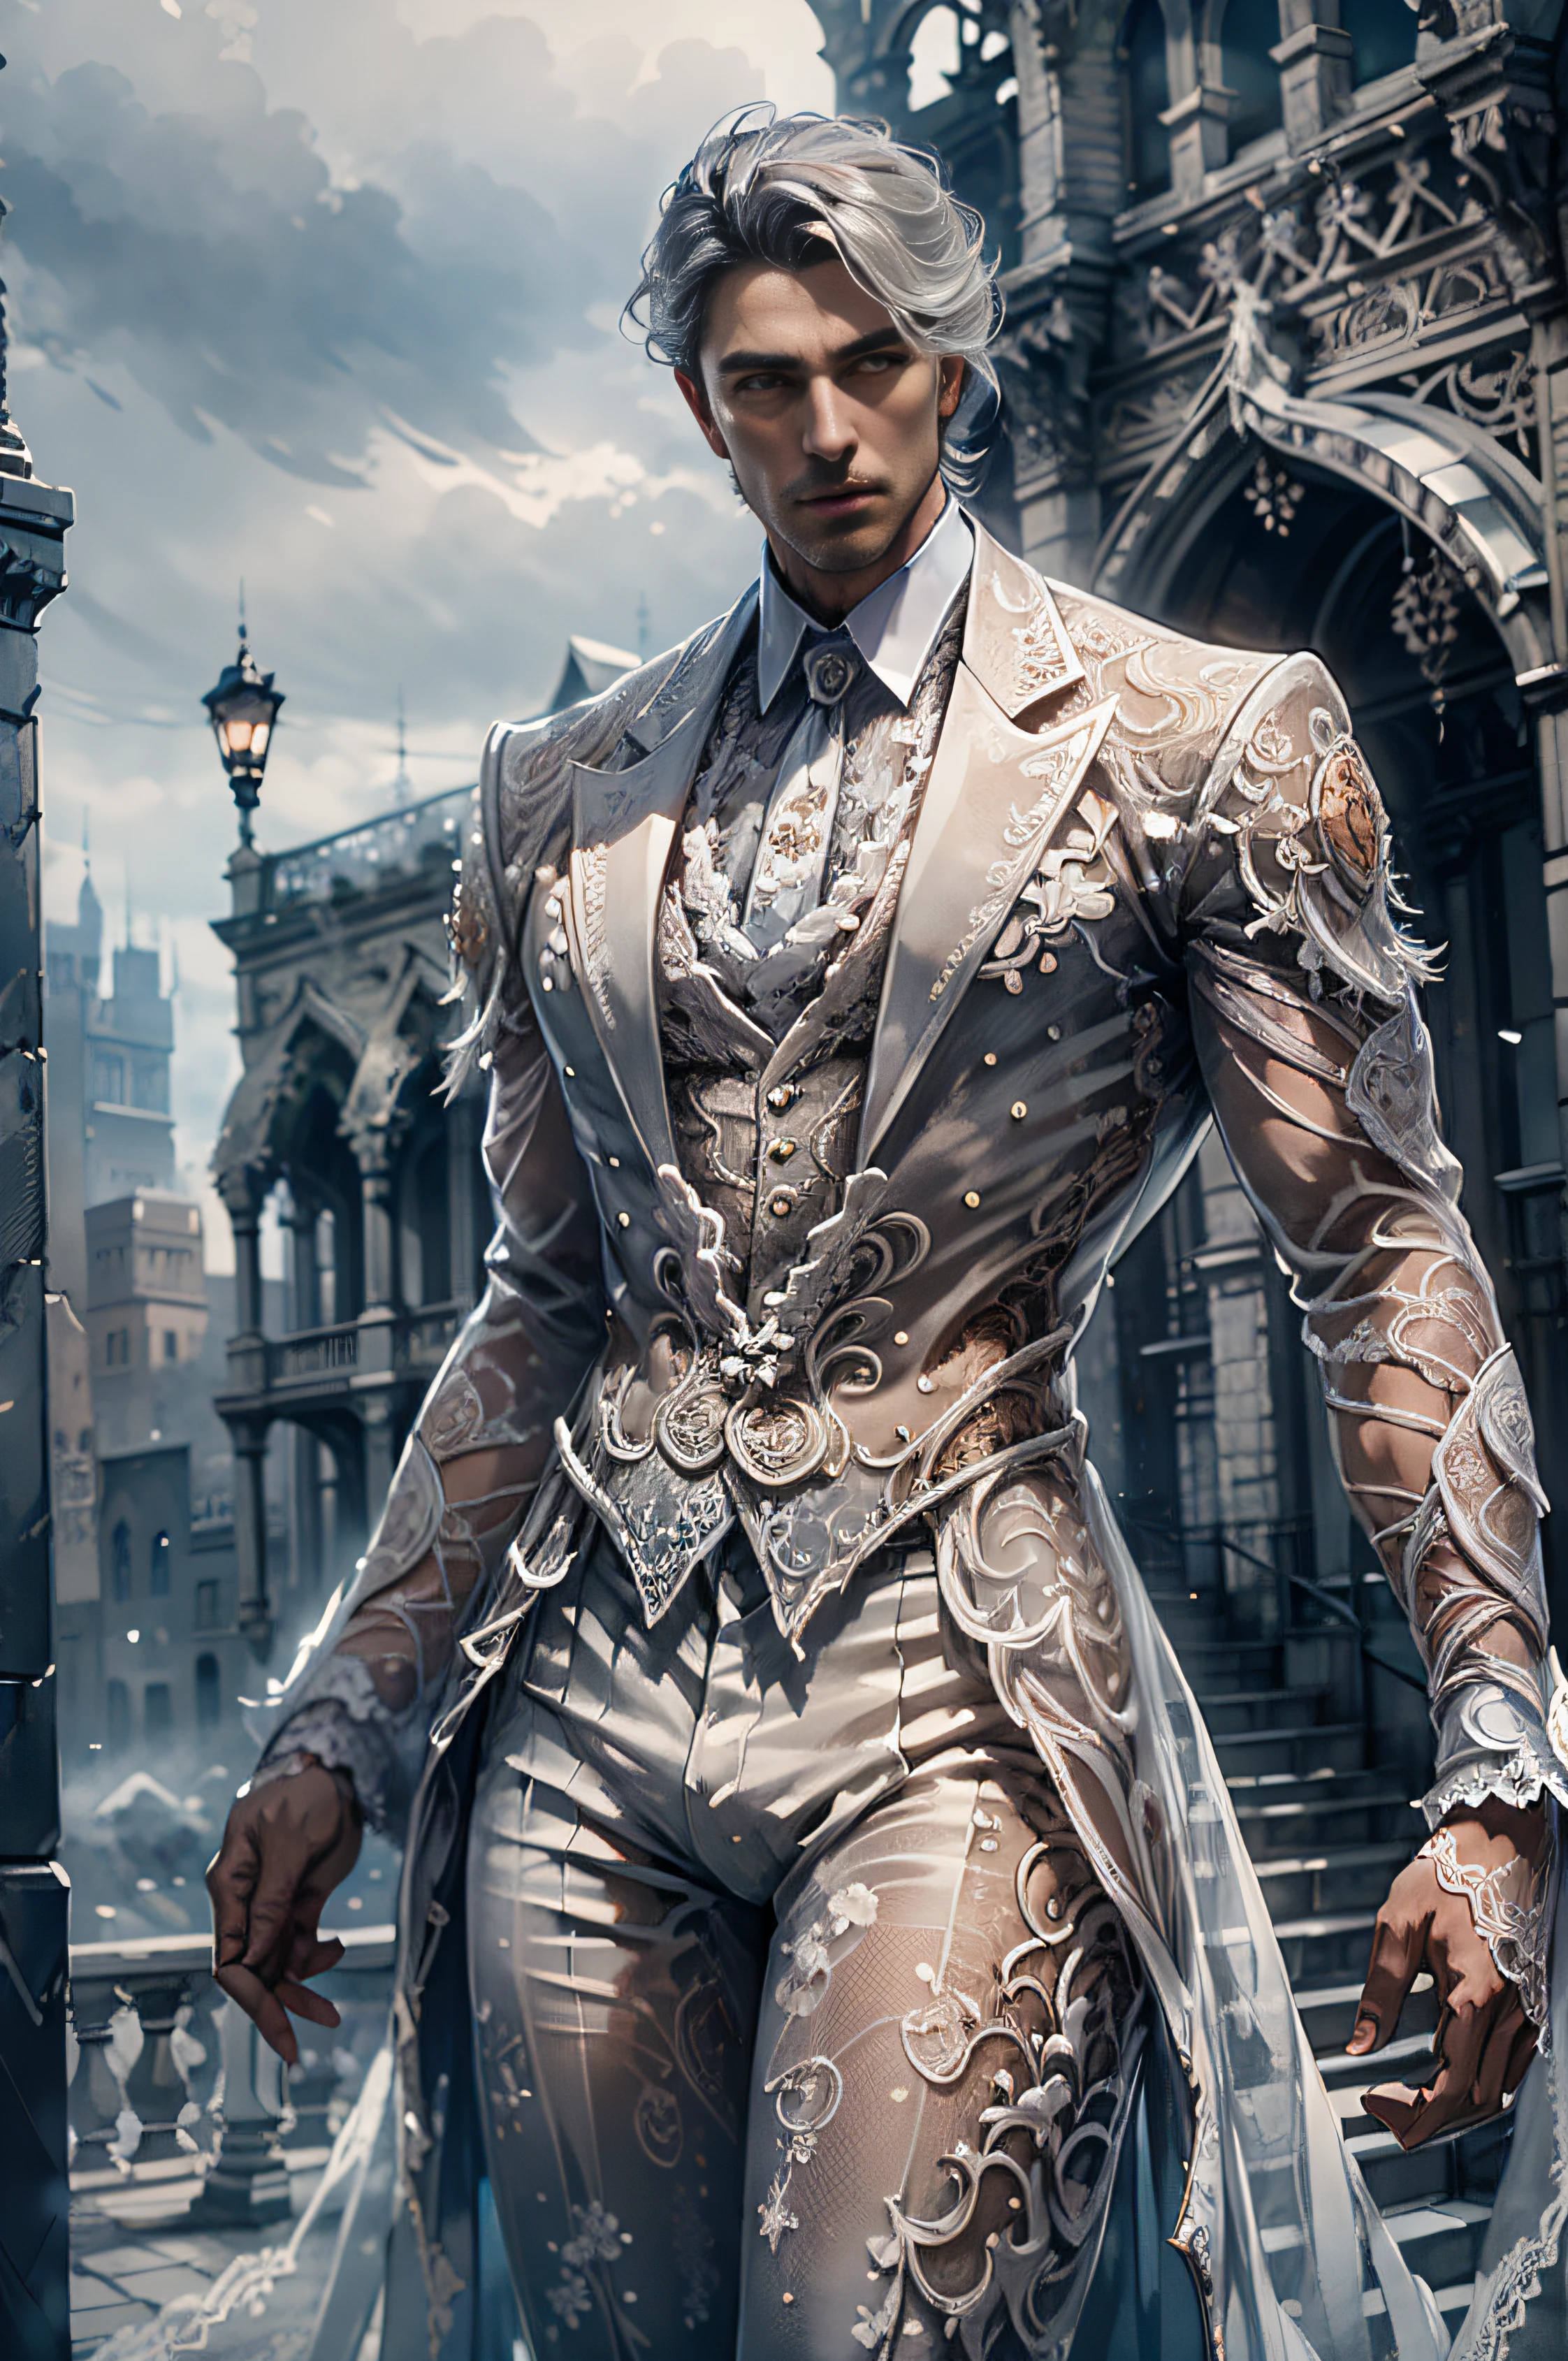 LAC34RMOR,，Wearing (White lace coat), See-through, Dynamic pose, fantasy city background, street, Pants, shirt, Realistic, Masterpiece, Intricate details, Detailed background, Depth of field, photo of a man,（（（The crotch is raised）））